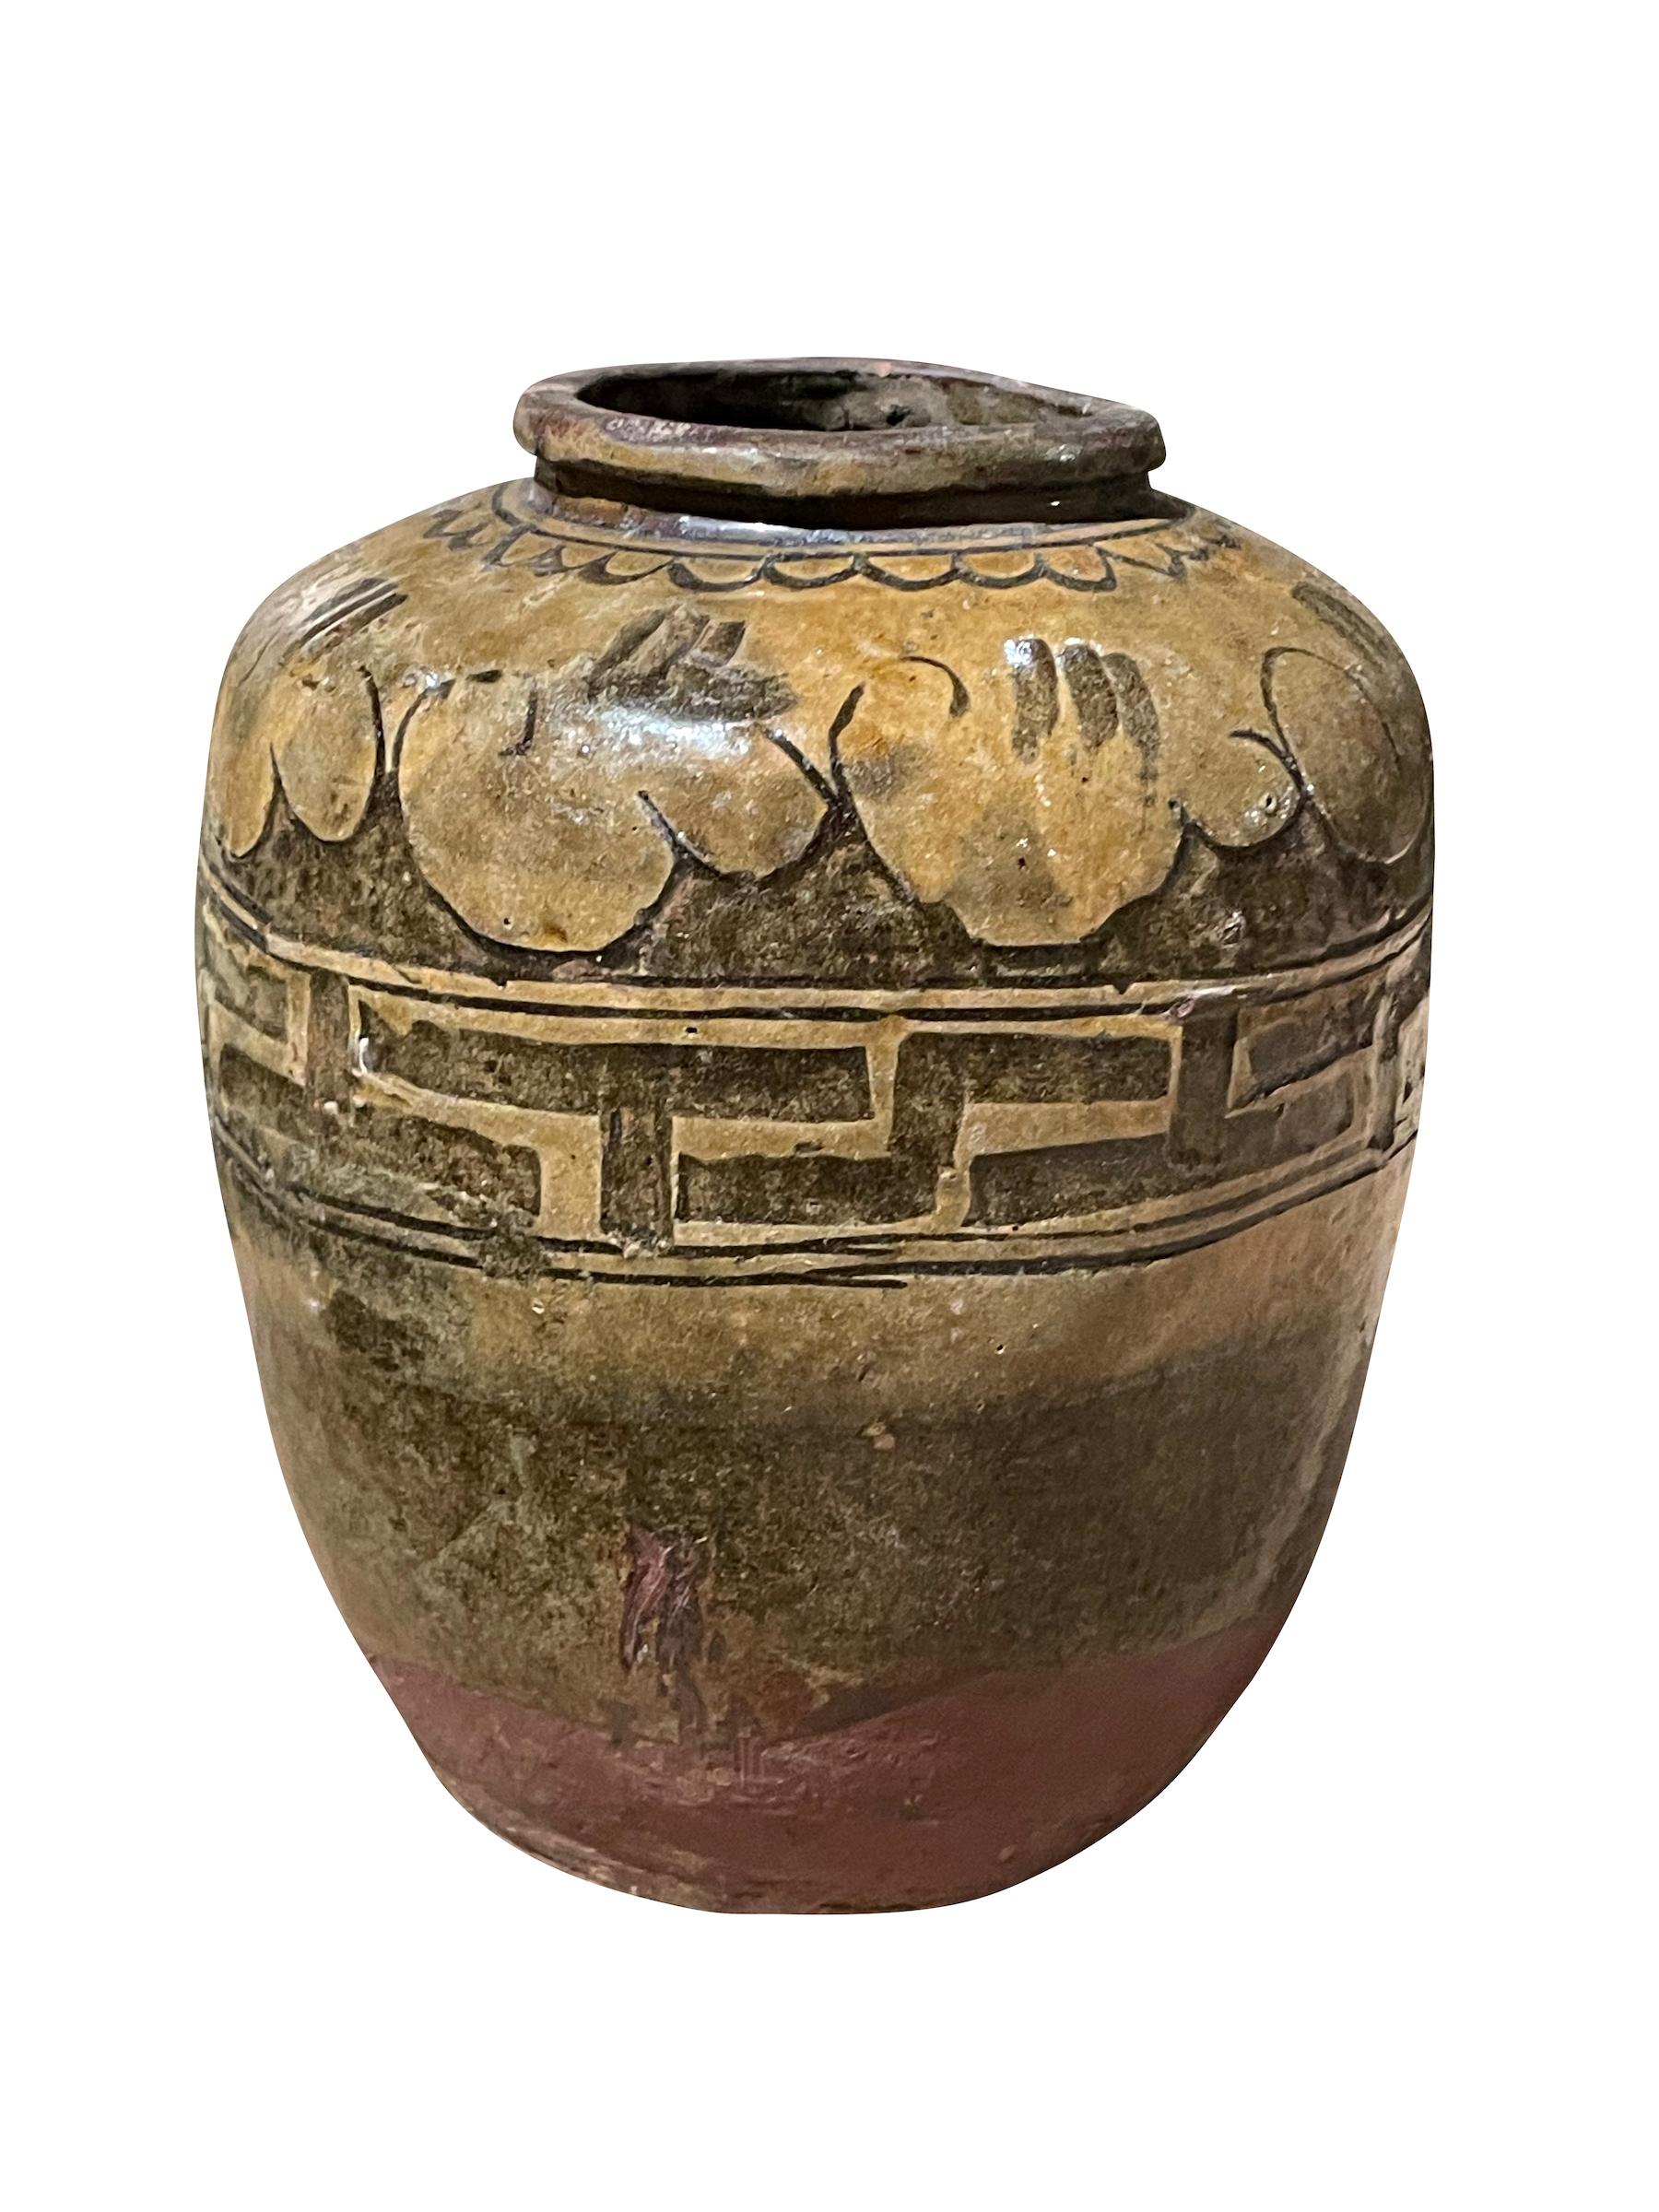 19th century Chinese olive and gold glaze barrel shaped vase.
Decorative geometric design.
Natural weathered patina and wear.
Part of a large collection.
ARRIVING APRIL